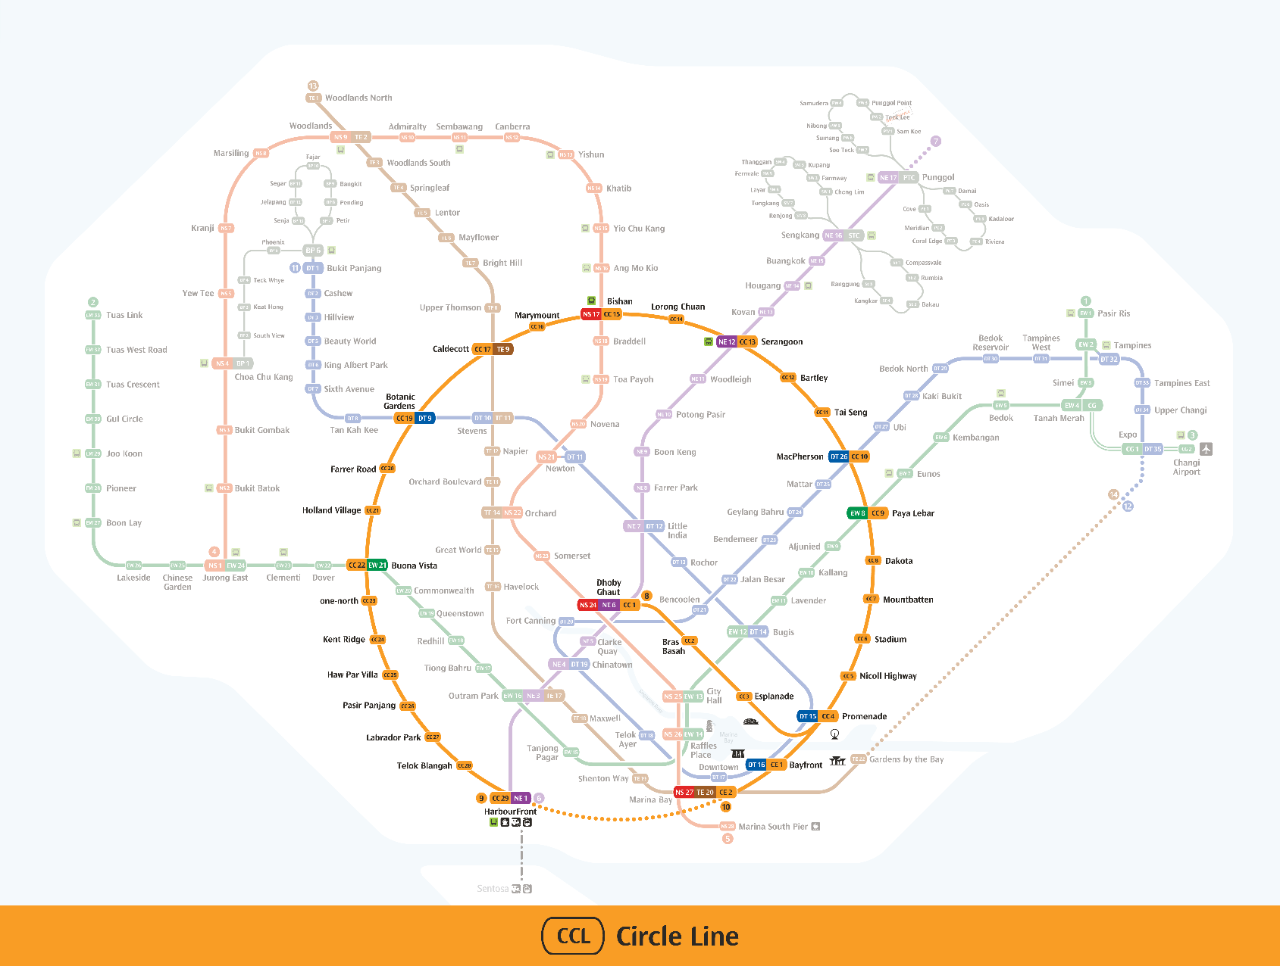 This is the System Map for Circle Line. 